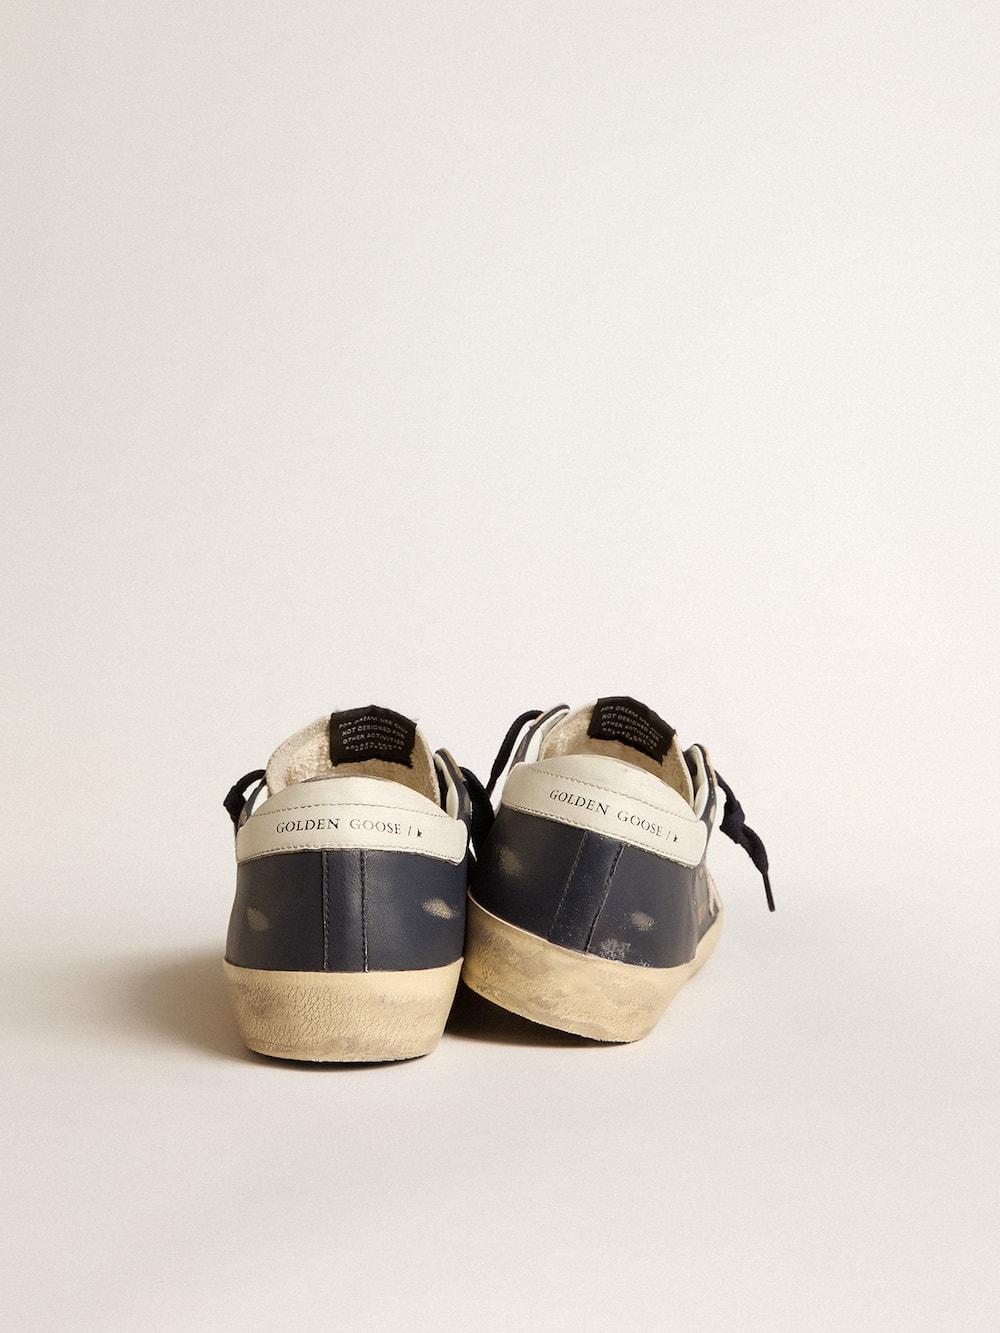 Golden Goose - Men's Super-Star in blue nappa leather with white leather star and heel tab in 